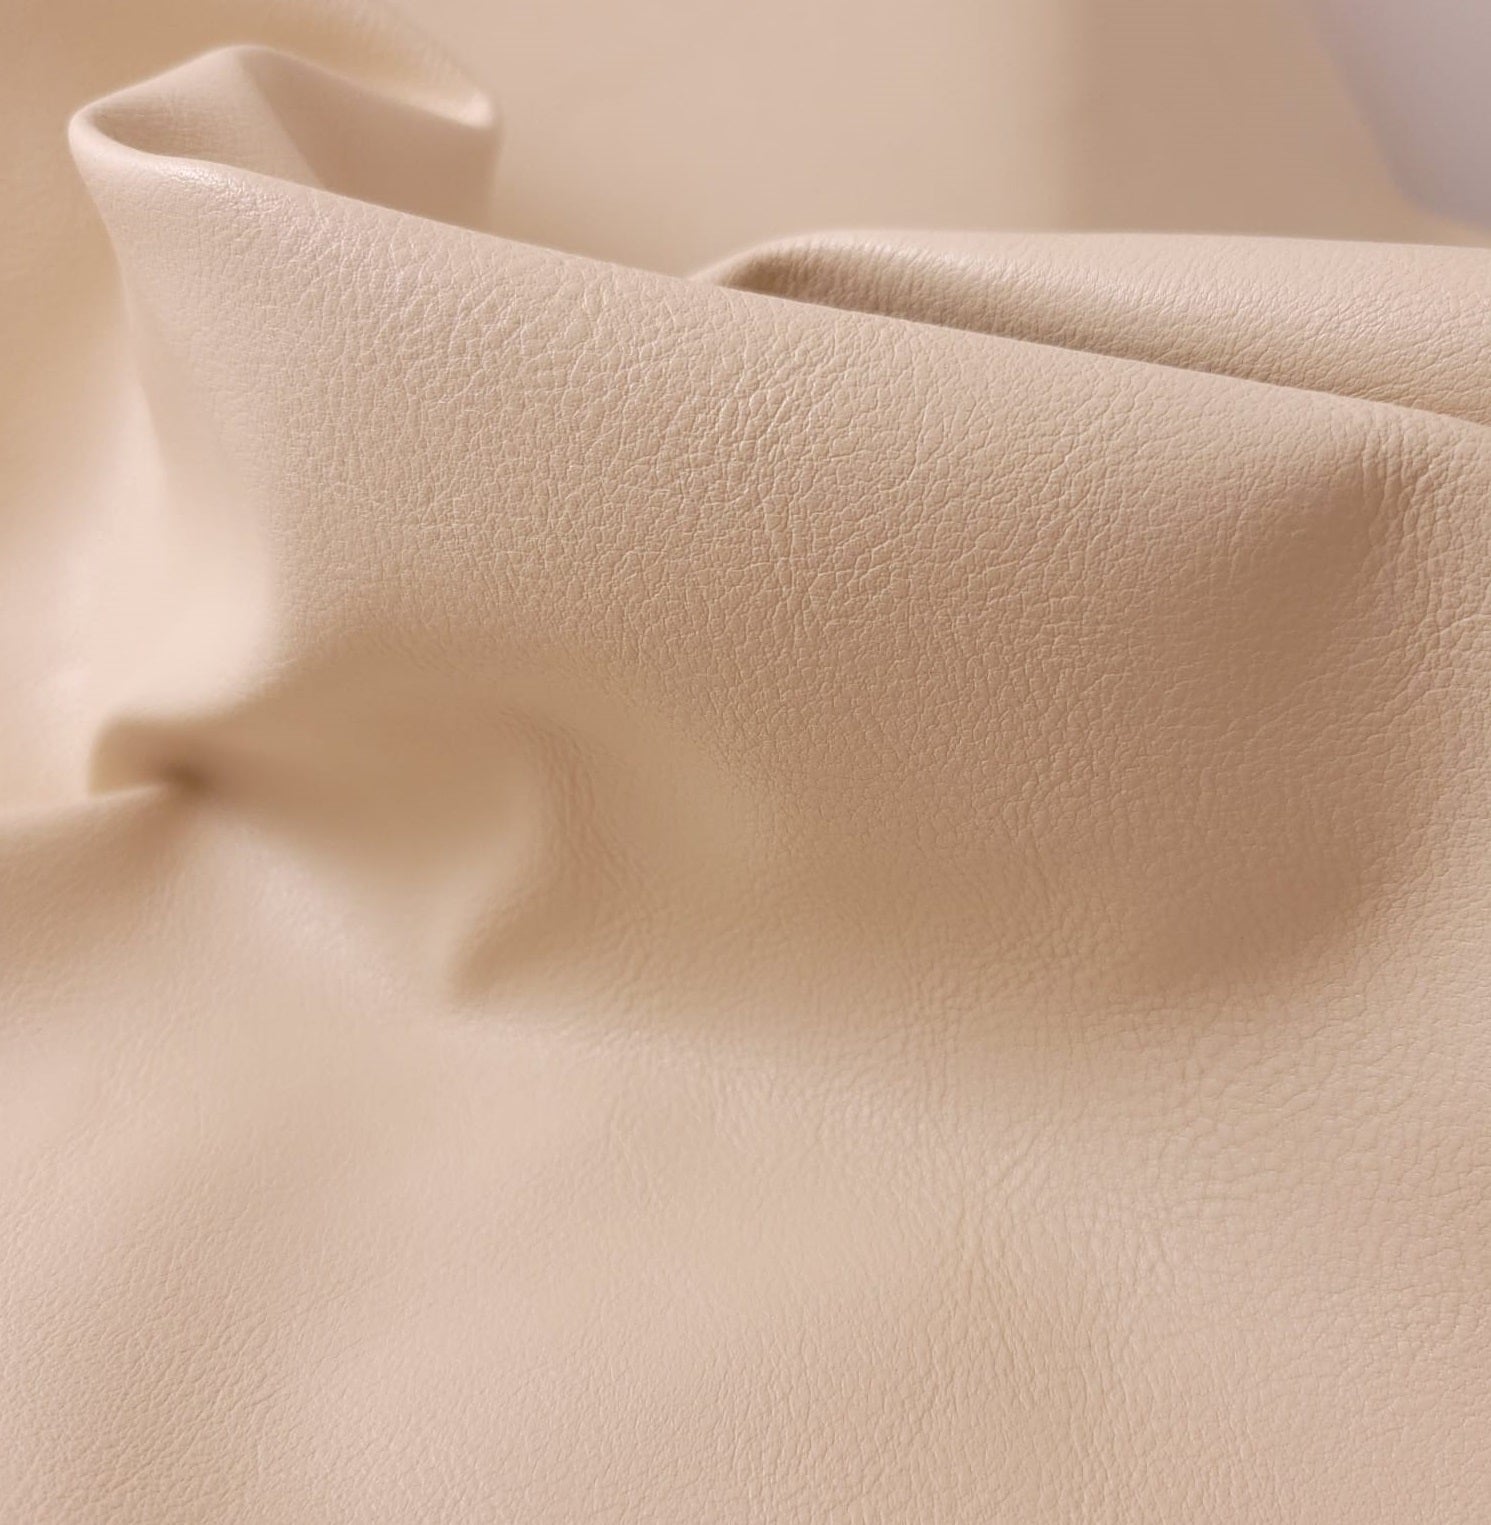  Faux vegan leather by the yard sheets distressed leather fabric for upholstery 30,000 Double Rubs vinyl sheets nappa leather crafts bookbinding books furniture fabrics uphilstery fuax material pu pleather faiux learher cruelty free nappa seat bone cream off white